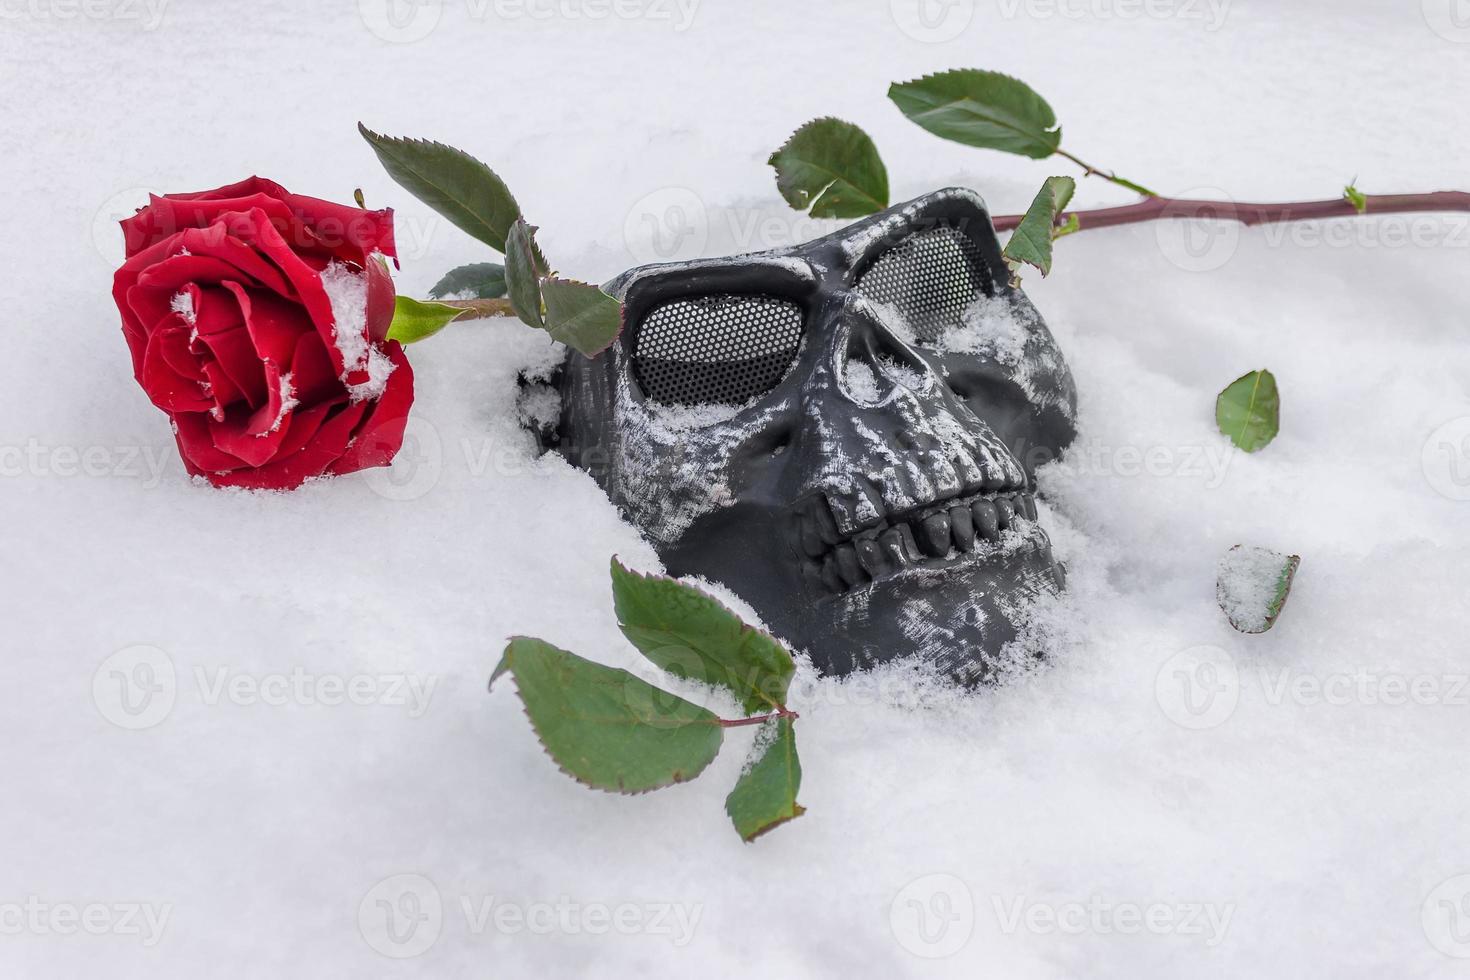 Black mask skull in the snow with a red rose as a symbol photo